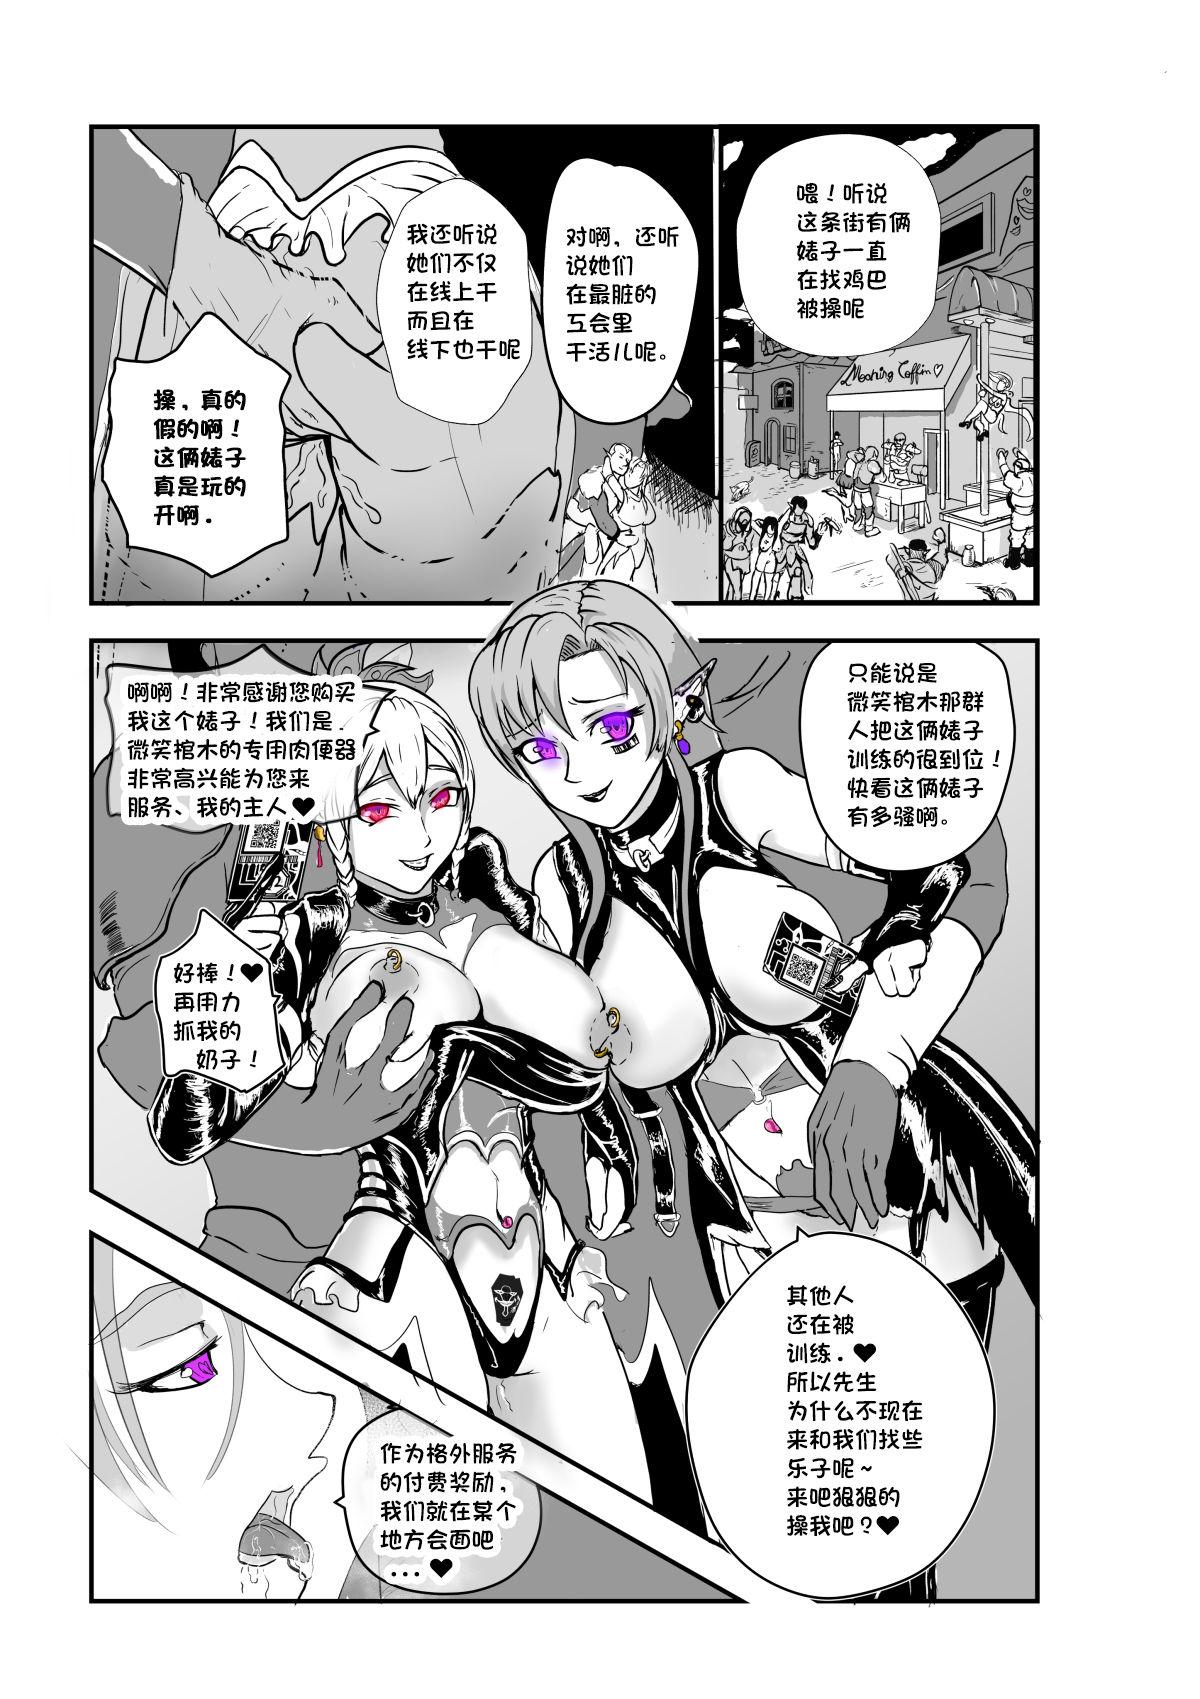 Punished SAO Lustful Obedience Release - Sword art online Vergon - Page 3